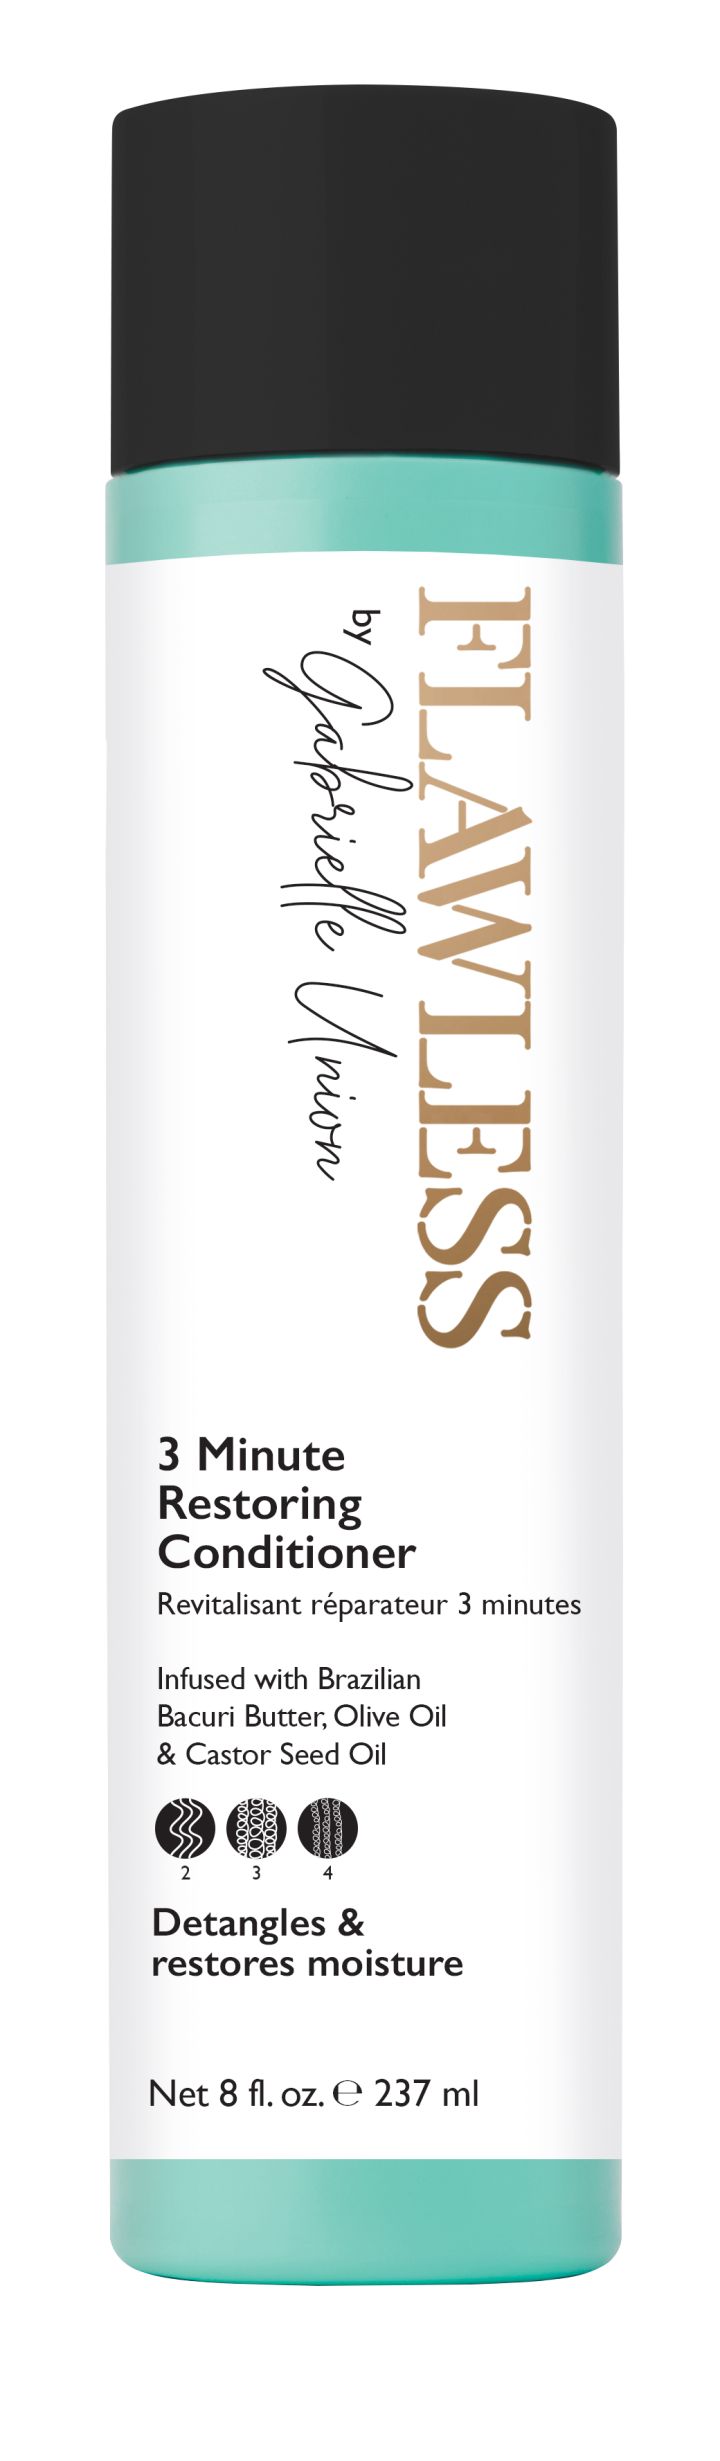 Flawless by Gabrielle Union 3 Minute Restoring Conditioner